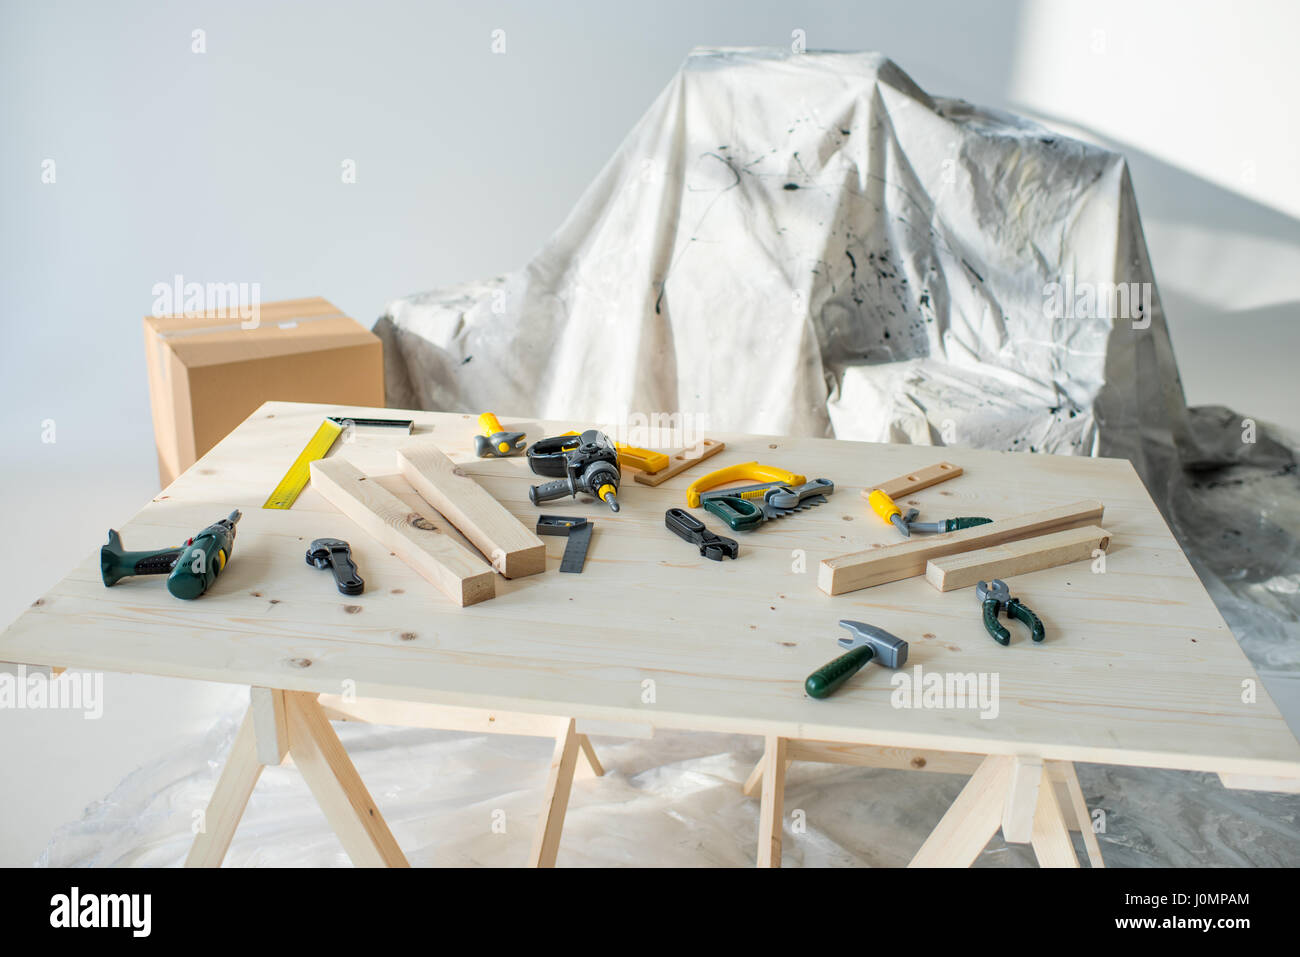 Toy tools and wooden planks on table in workshop Stock Photo